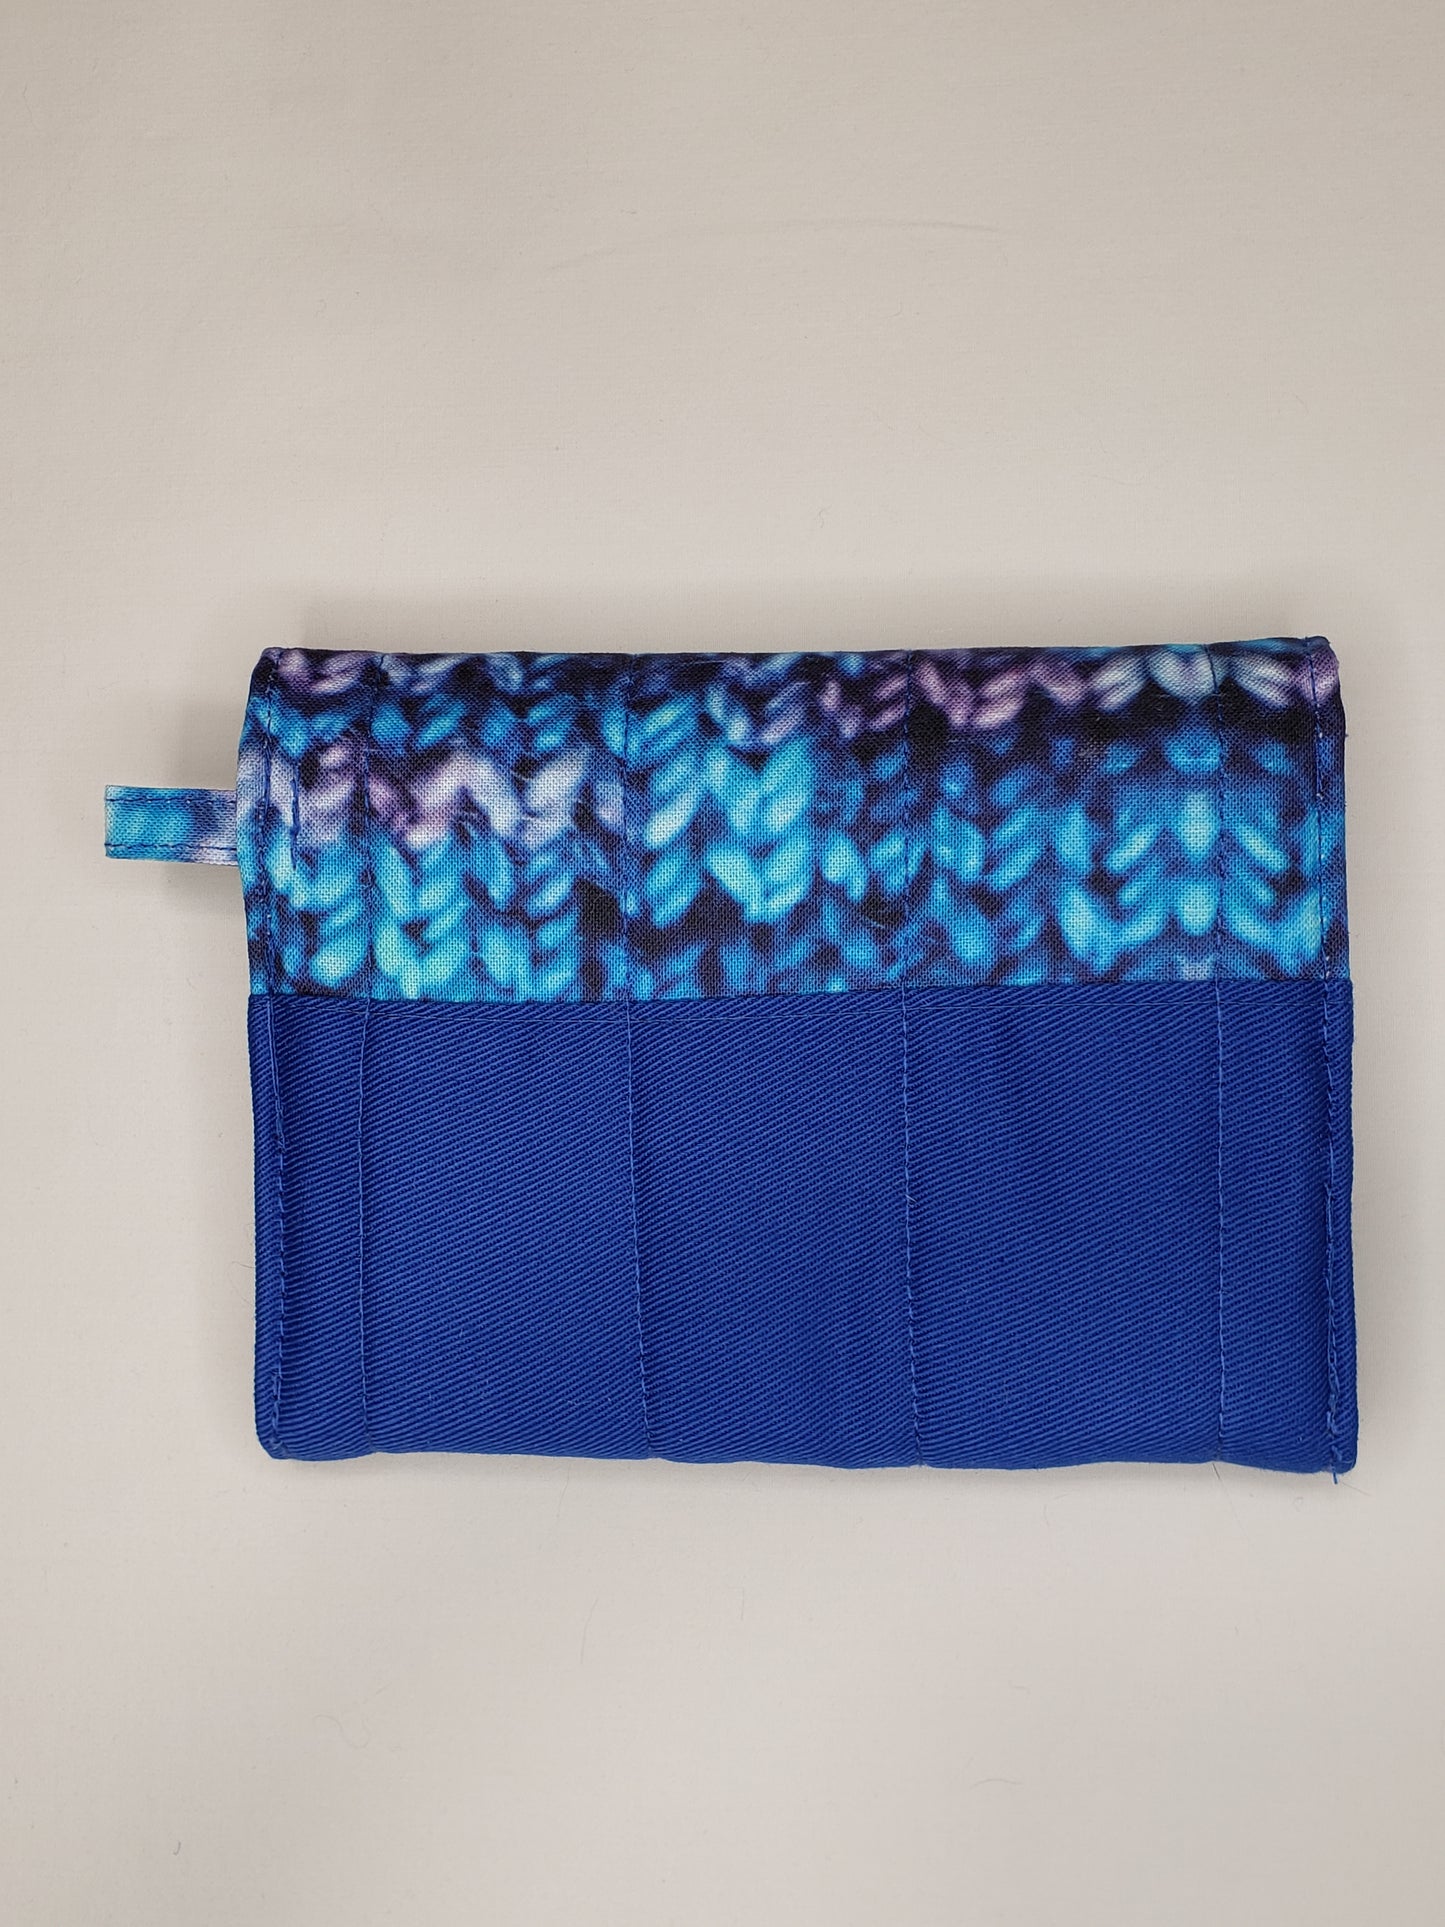 Wallet, Blue small wallet, Coin purse, Small Wallet, Change Purse, Card Holder, Notions Bag